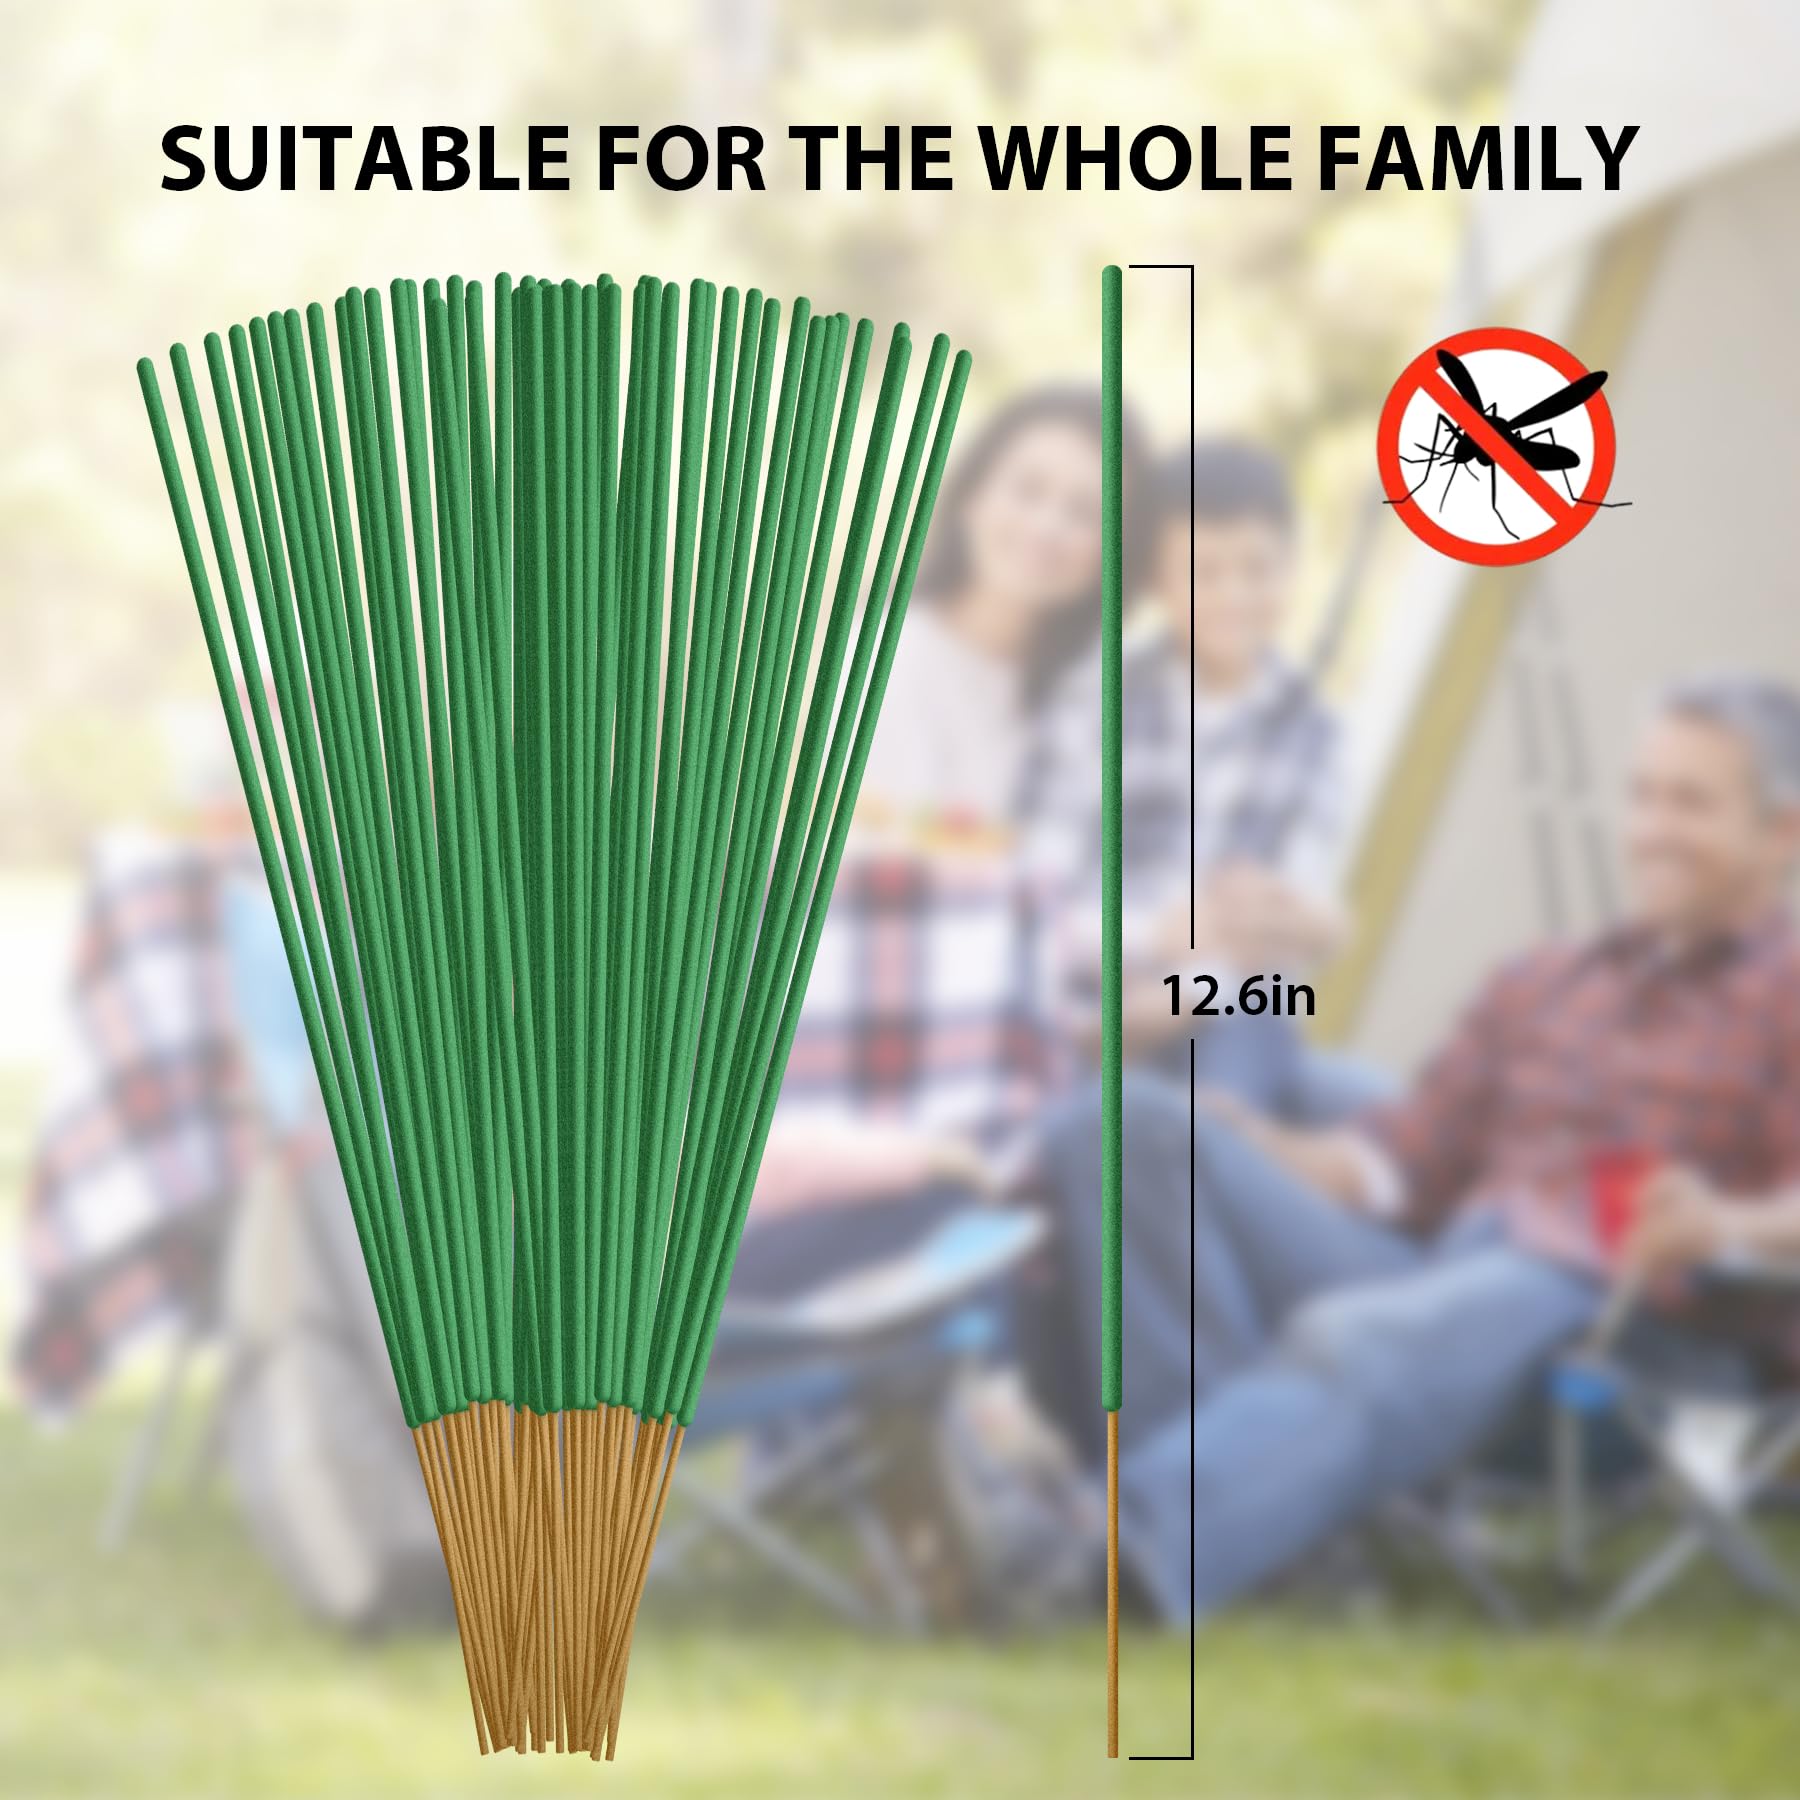 TRAP IT! Mosquito Repellent Outdoor Patio, 120 PCS Natural Plant-Based Citronella Oil Incense Sticks Indoor Home Pet Family Safe, DEET Free Bug Insect Control Repellent for Yard Garden Camping Fishing